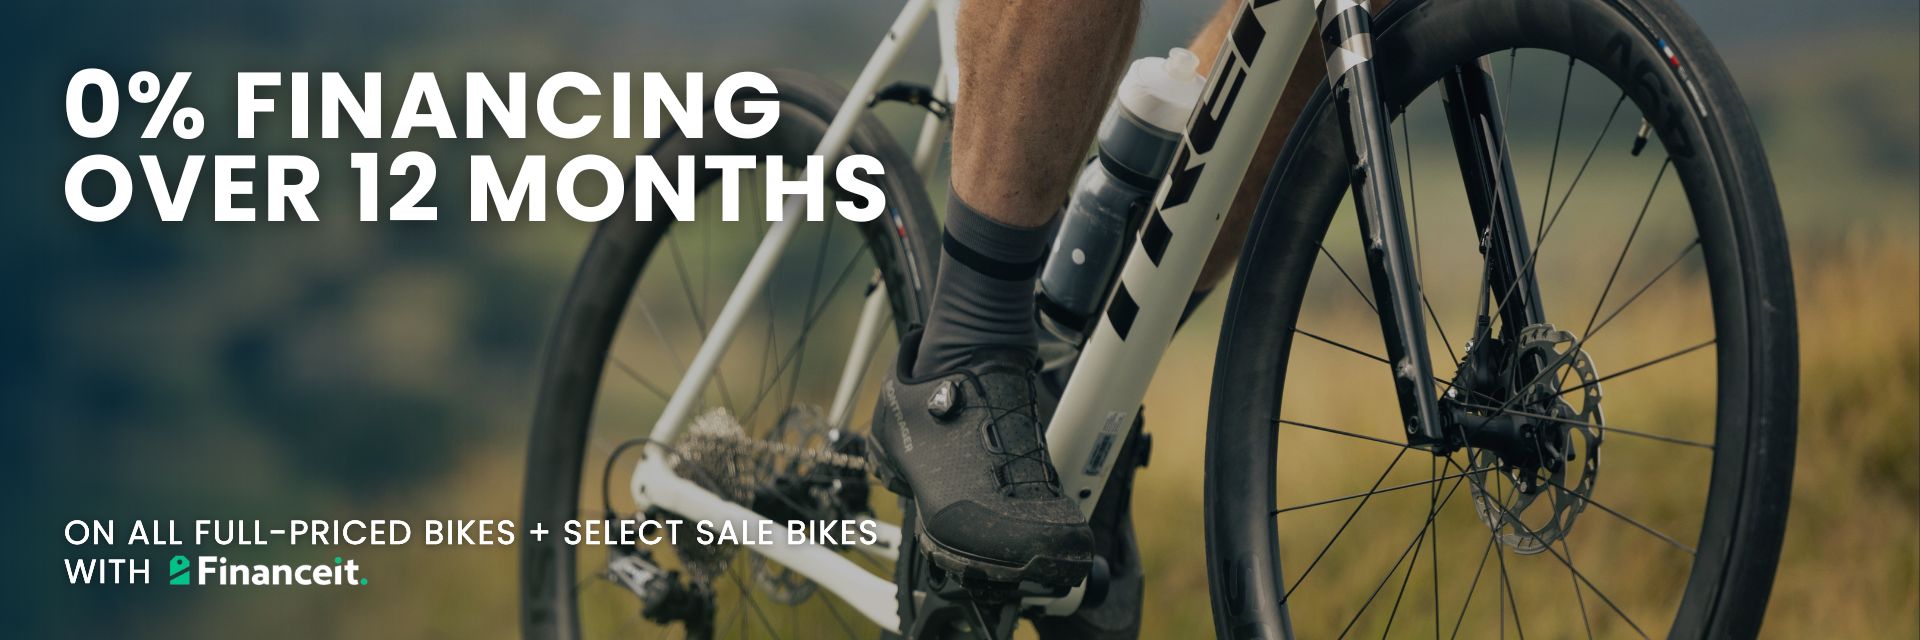 0% Financing Over 12 Months | On All Full-Priced Bikes + Select Sale Bikes